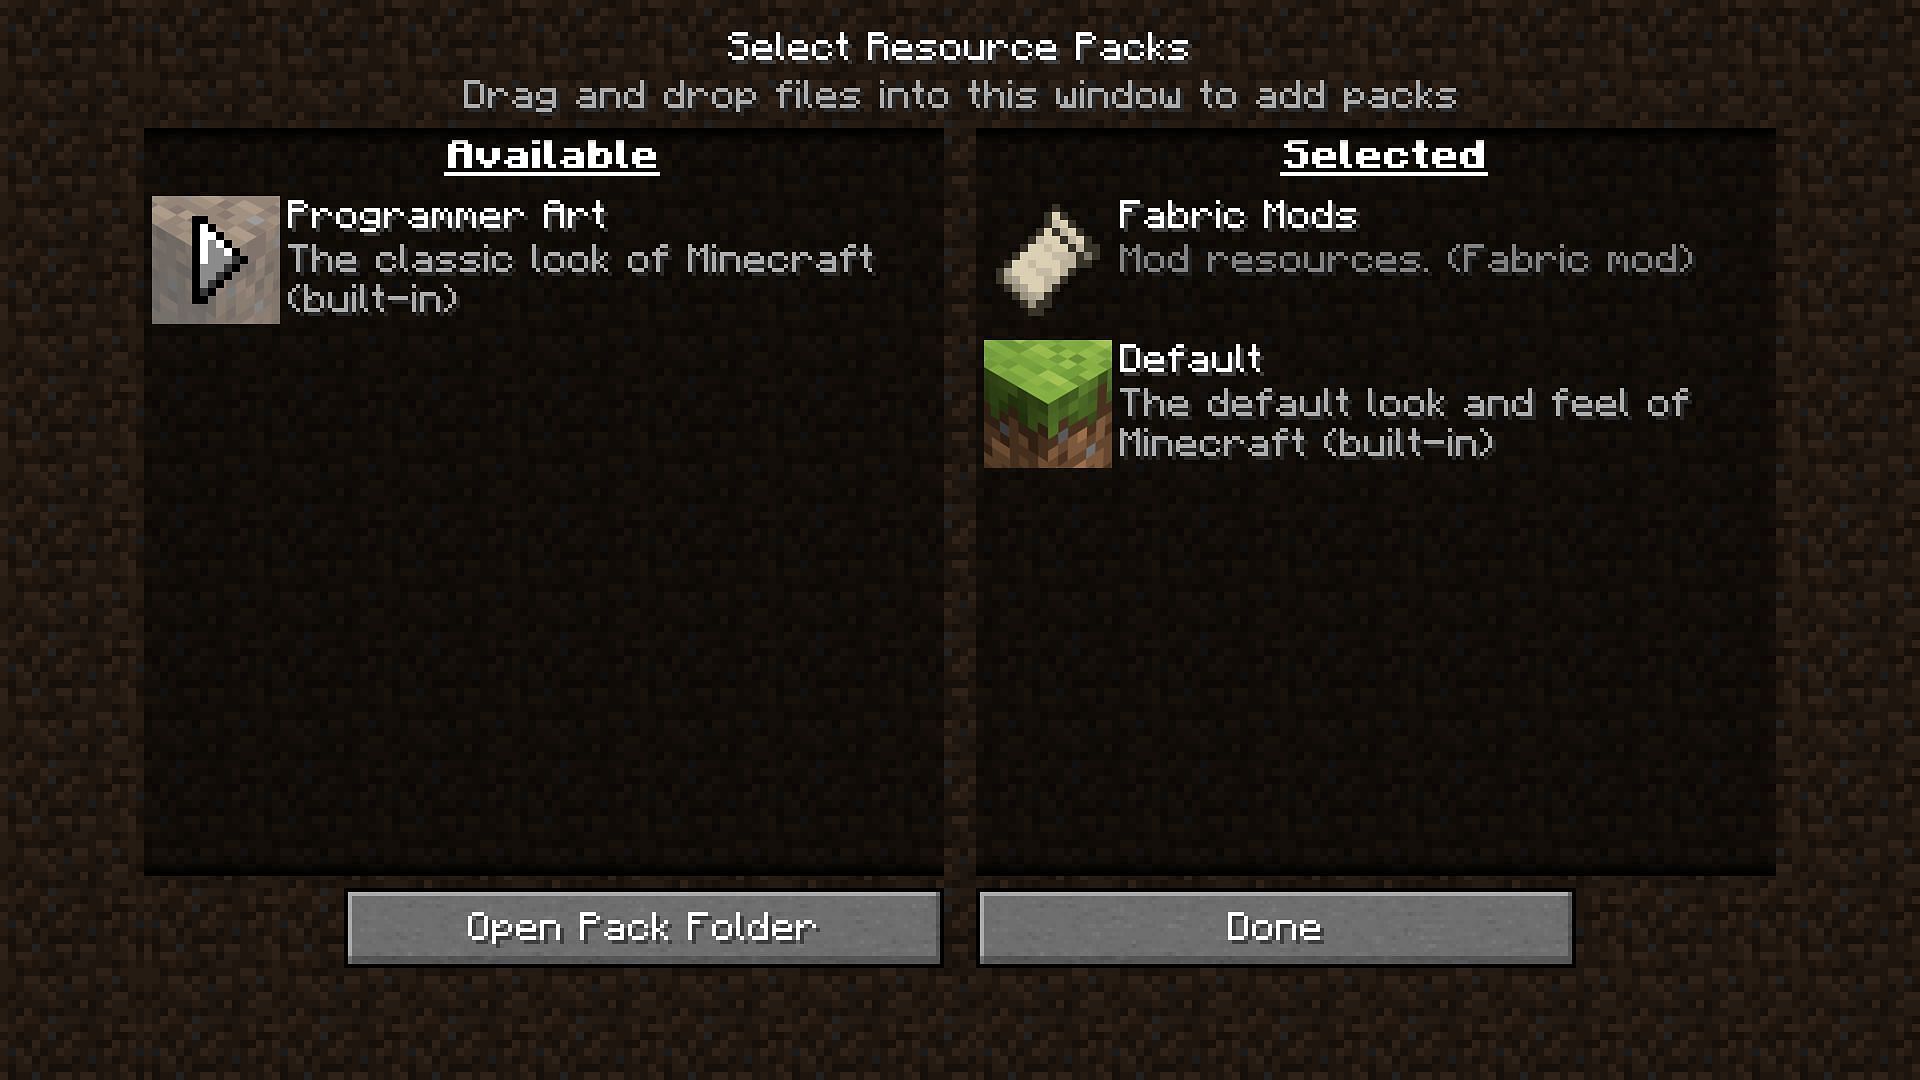 Simply activate the &#039;Programmer Art&#039; texture pack to experience Minecraft with old textures (Image via Mojang)